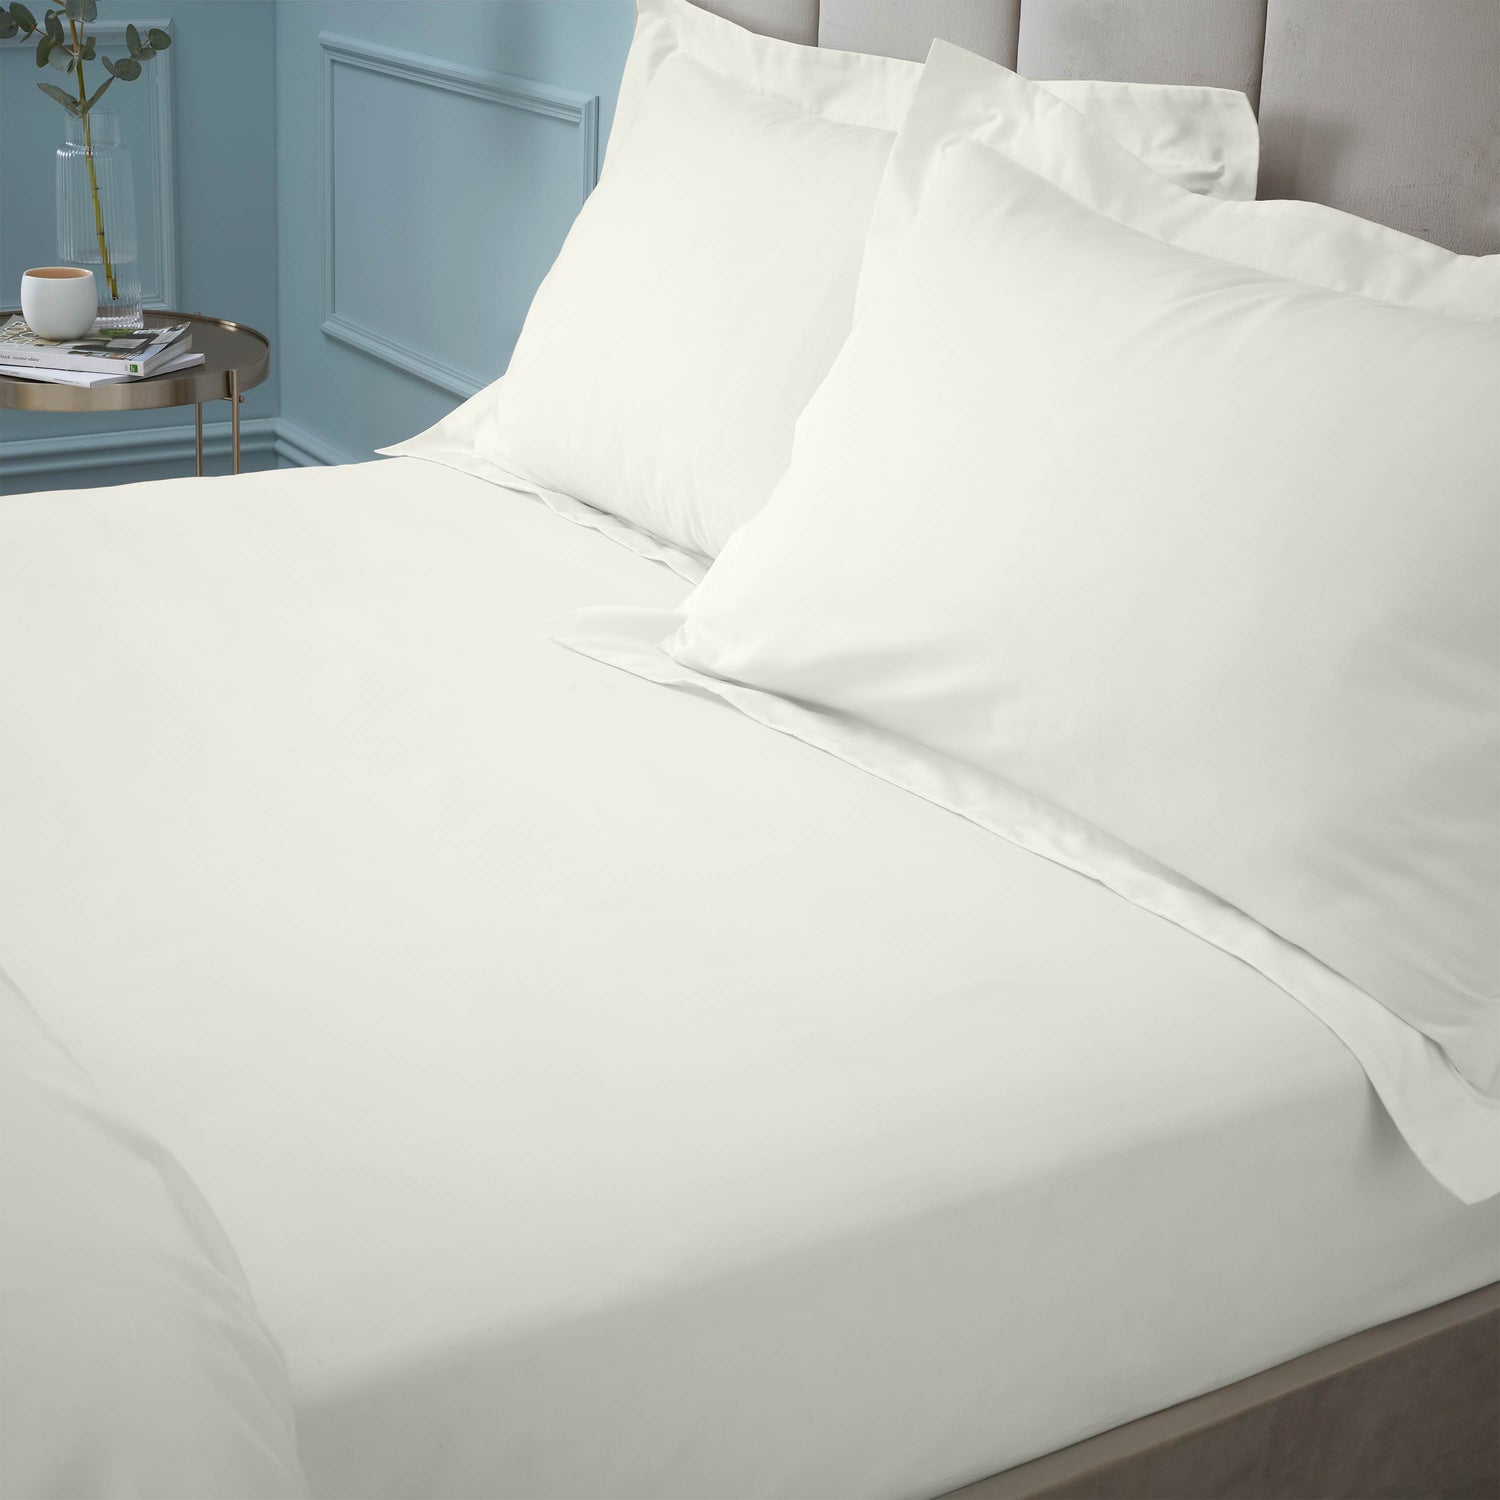 Bianca 180 Thread Count 100% Egyptian Cotton Fitted Sheet - Cream 1 Shaws Department Stores